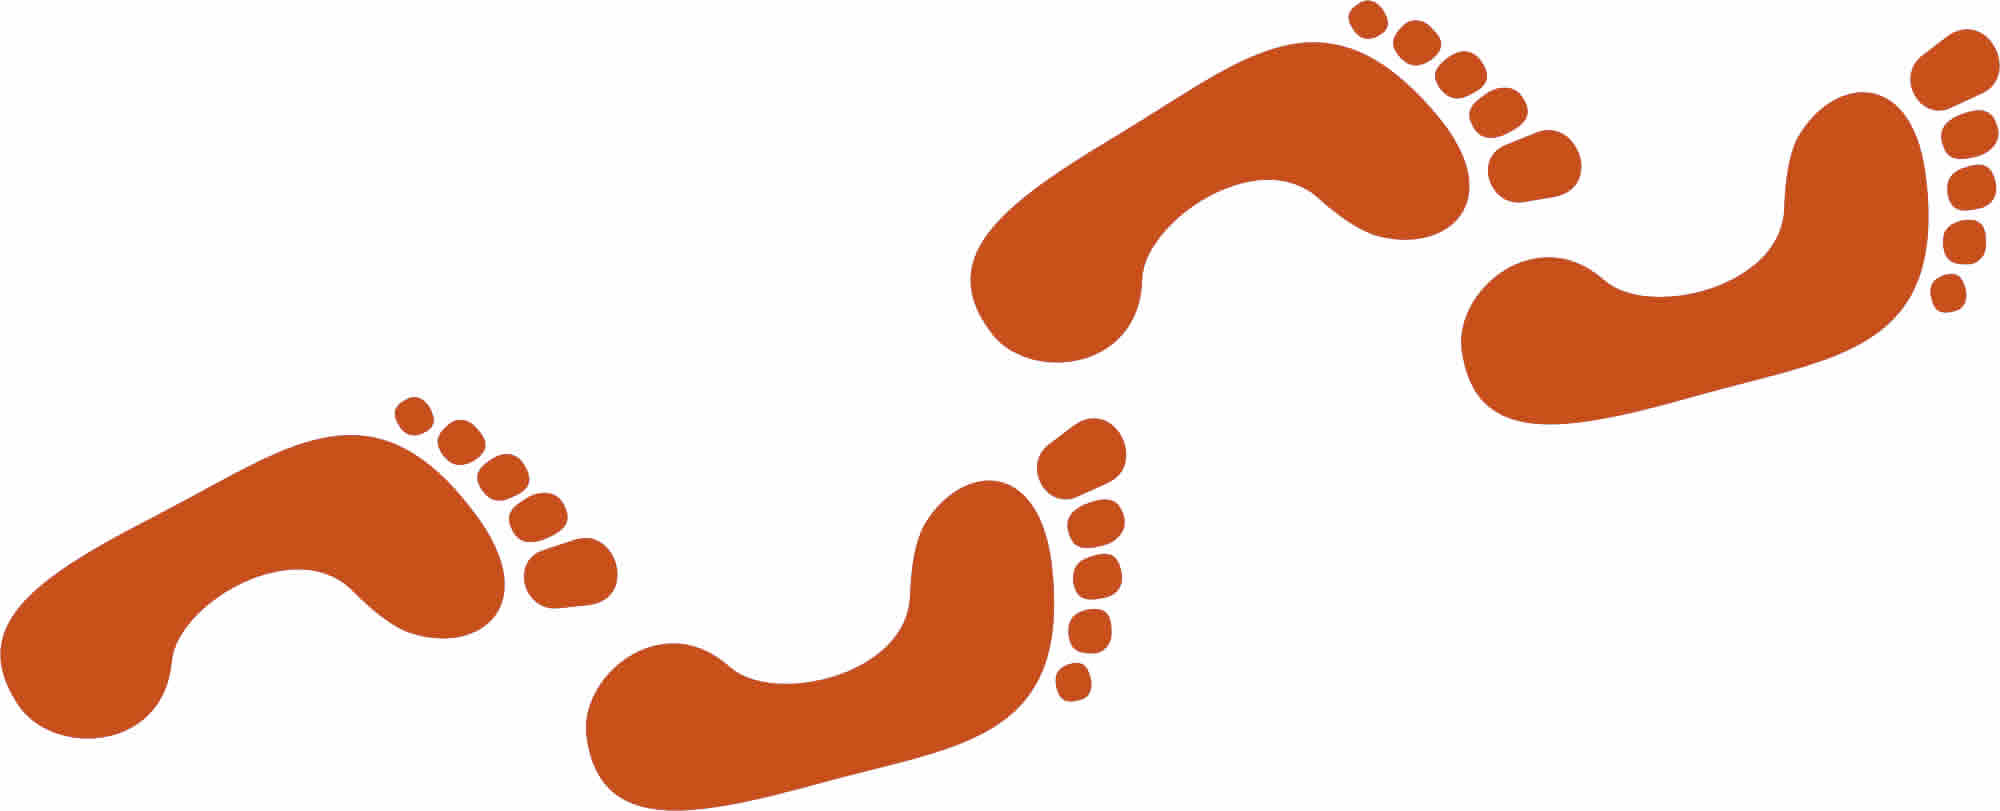 Clip Art Footsteps - Cliparts.co